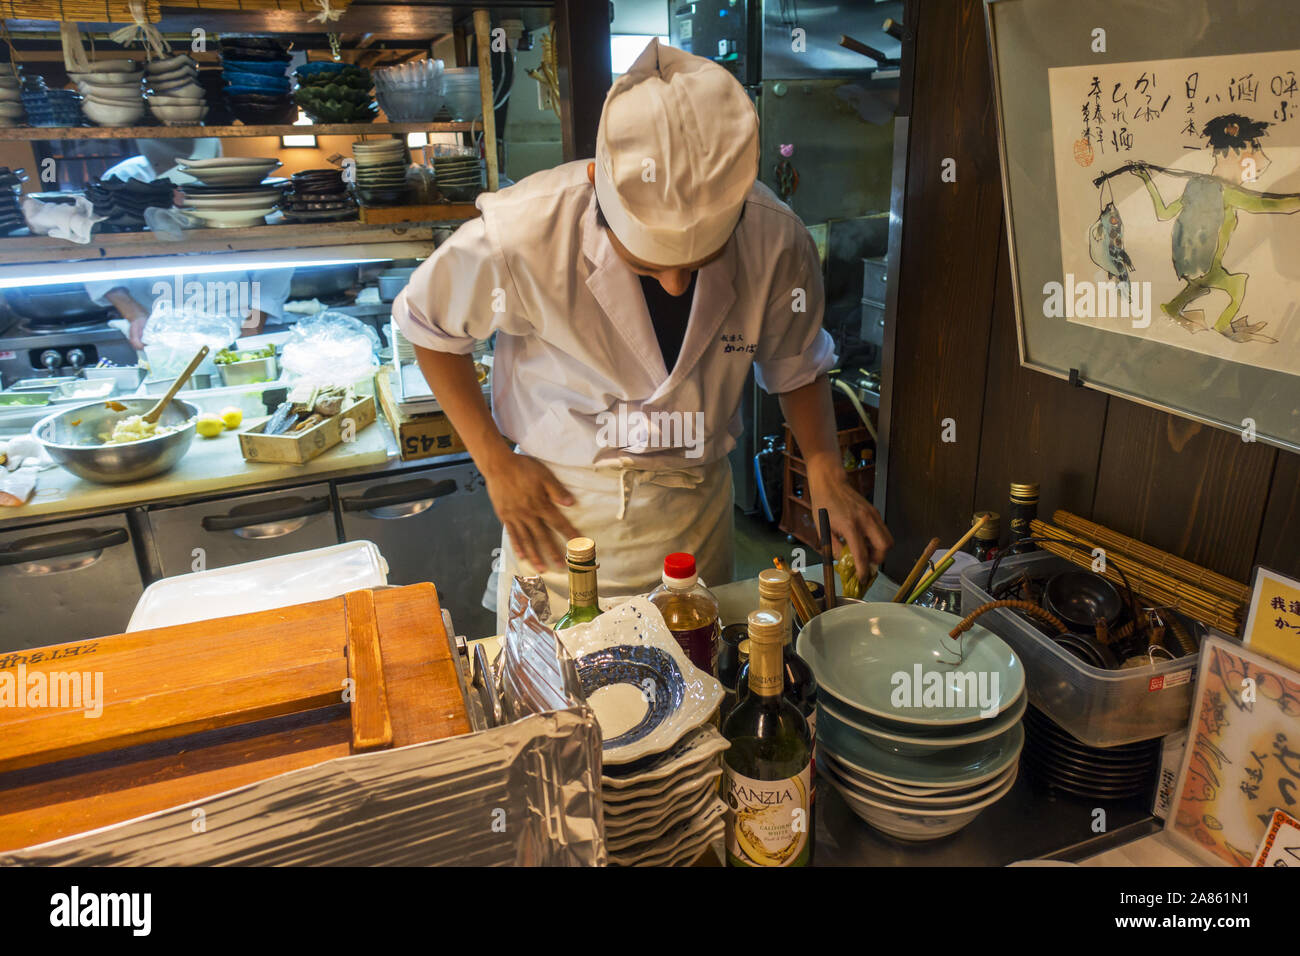 Kyoto, Japan - October 29th, 2019: Chef cooking inside a Izakaya, a sort of after work casual dining place. Stock Photo